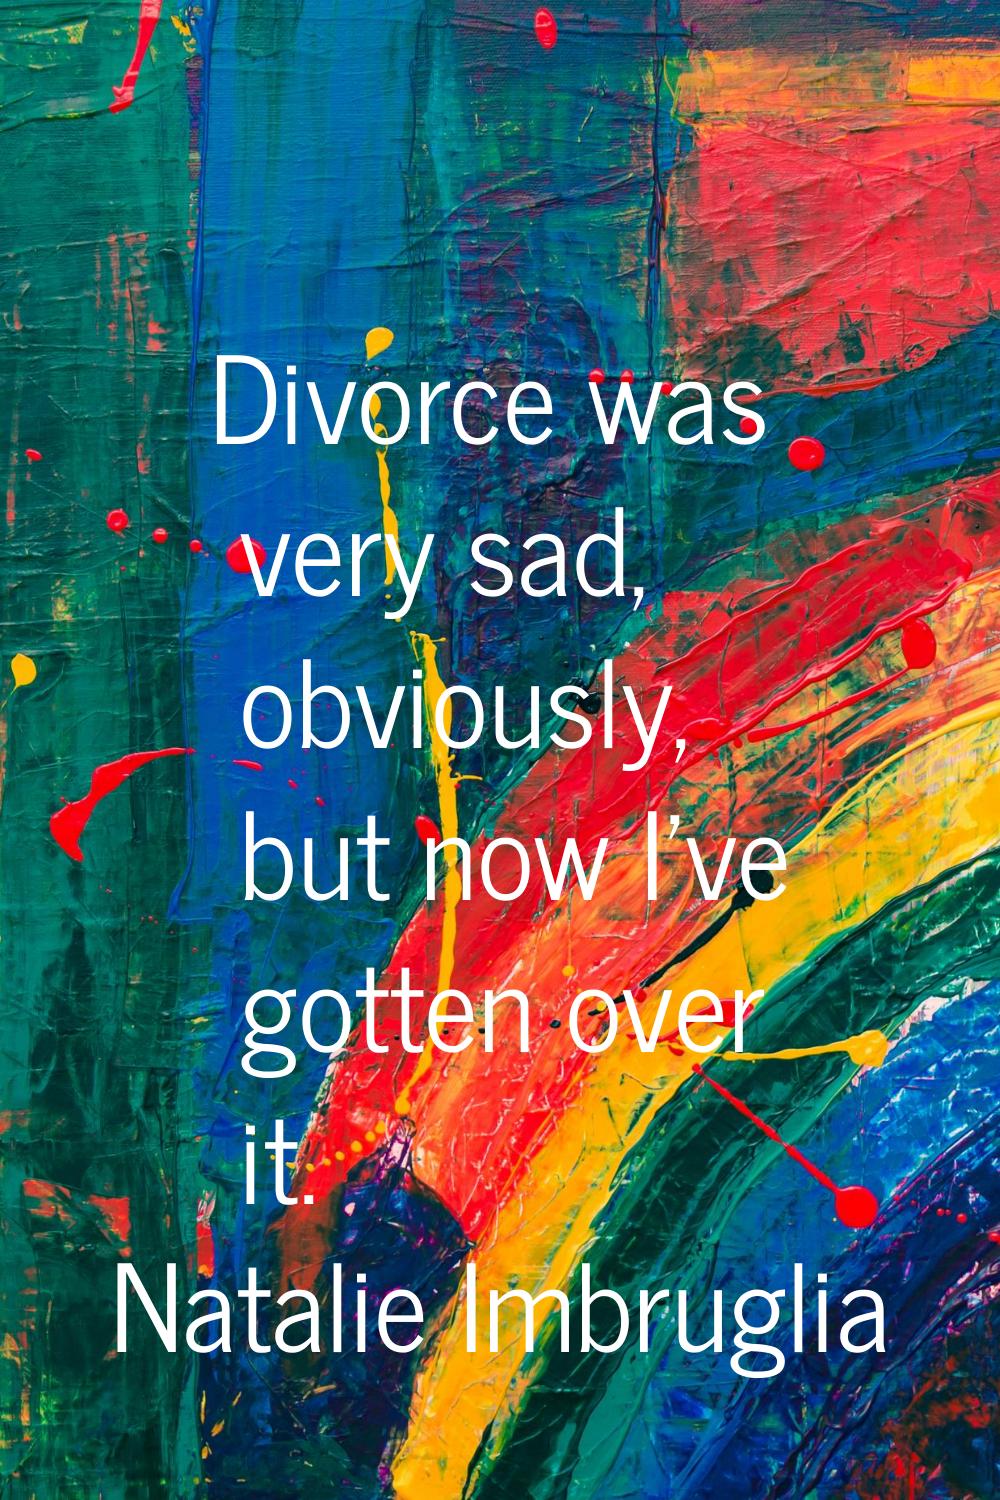 Divorce was very sad, obviously, but now I've gotten over it.